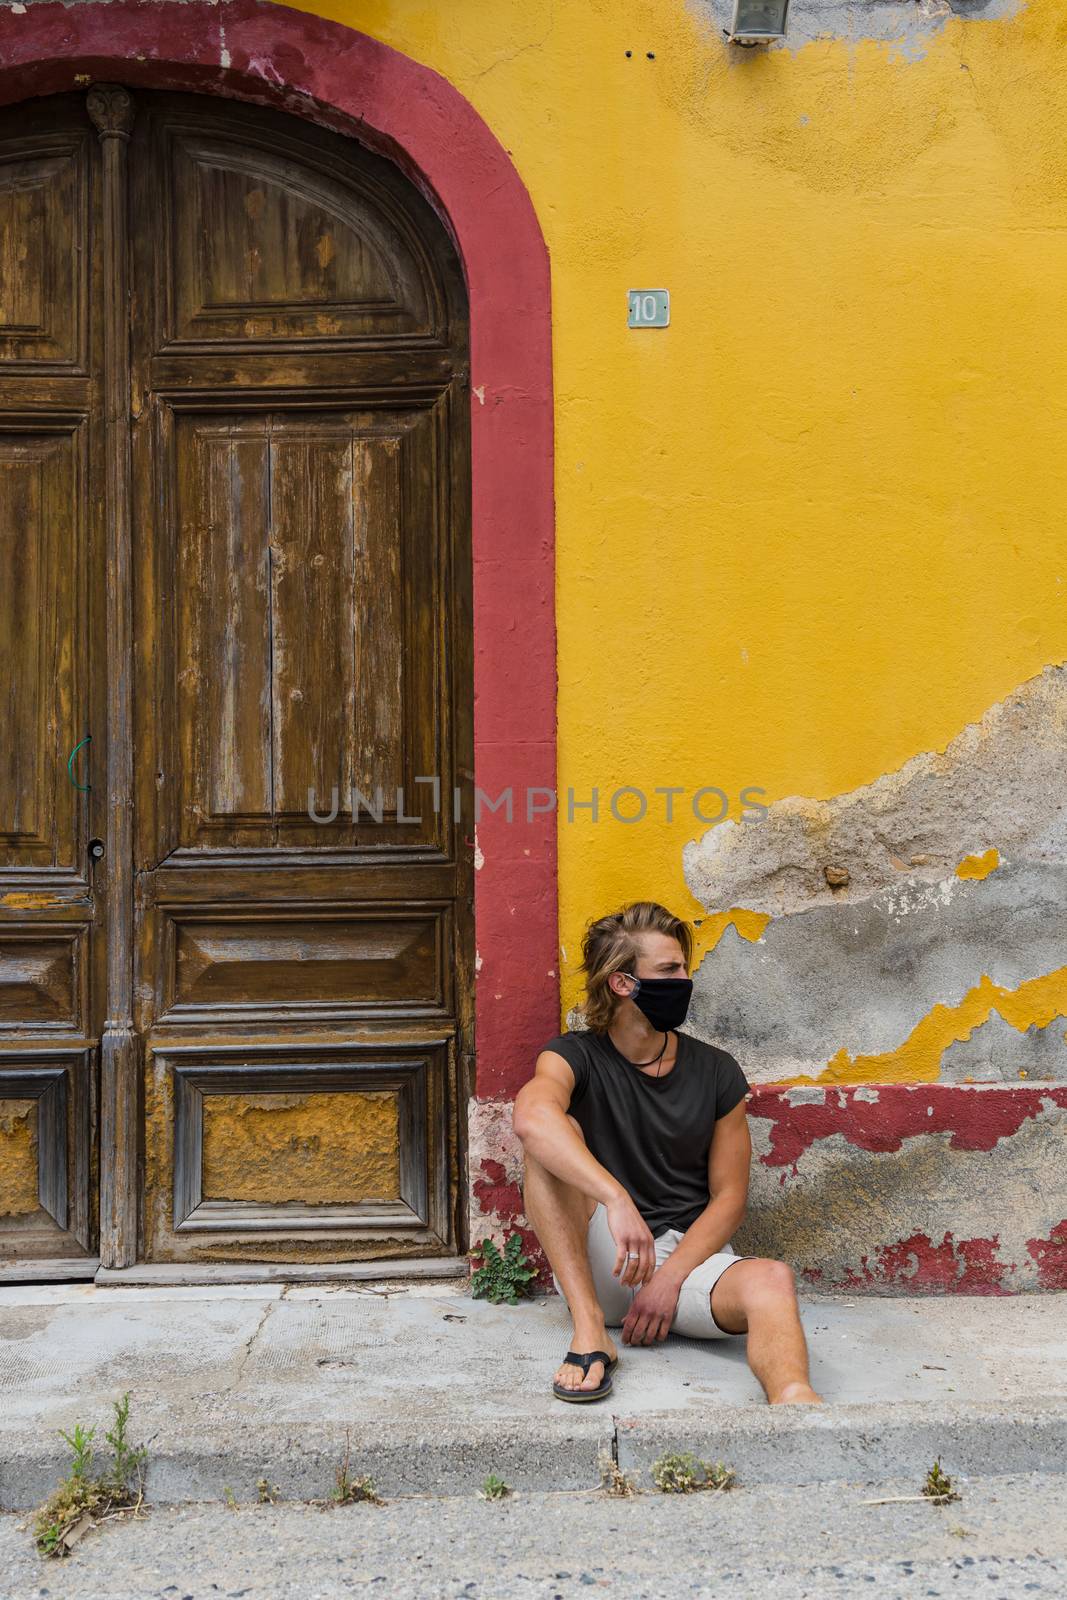 Young blond man with medium long hair with mask in his mouth from the virus, sitting on the street in front of a rustic old house